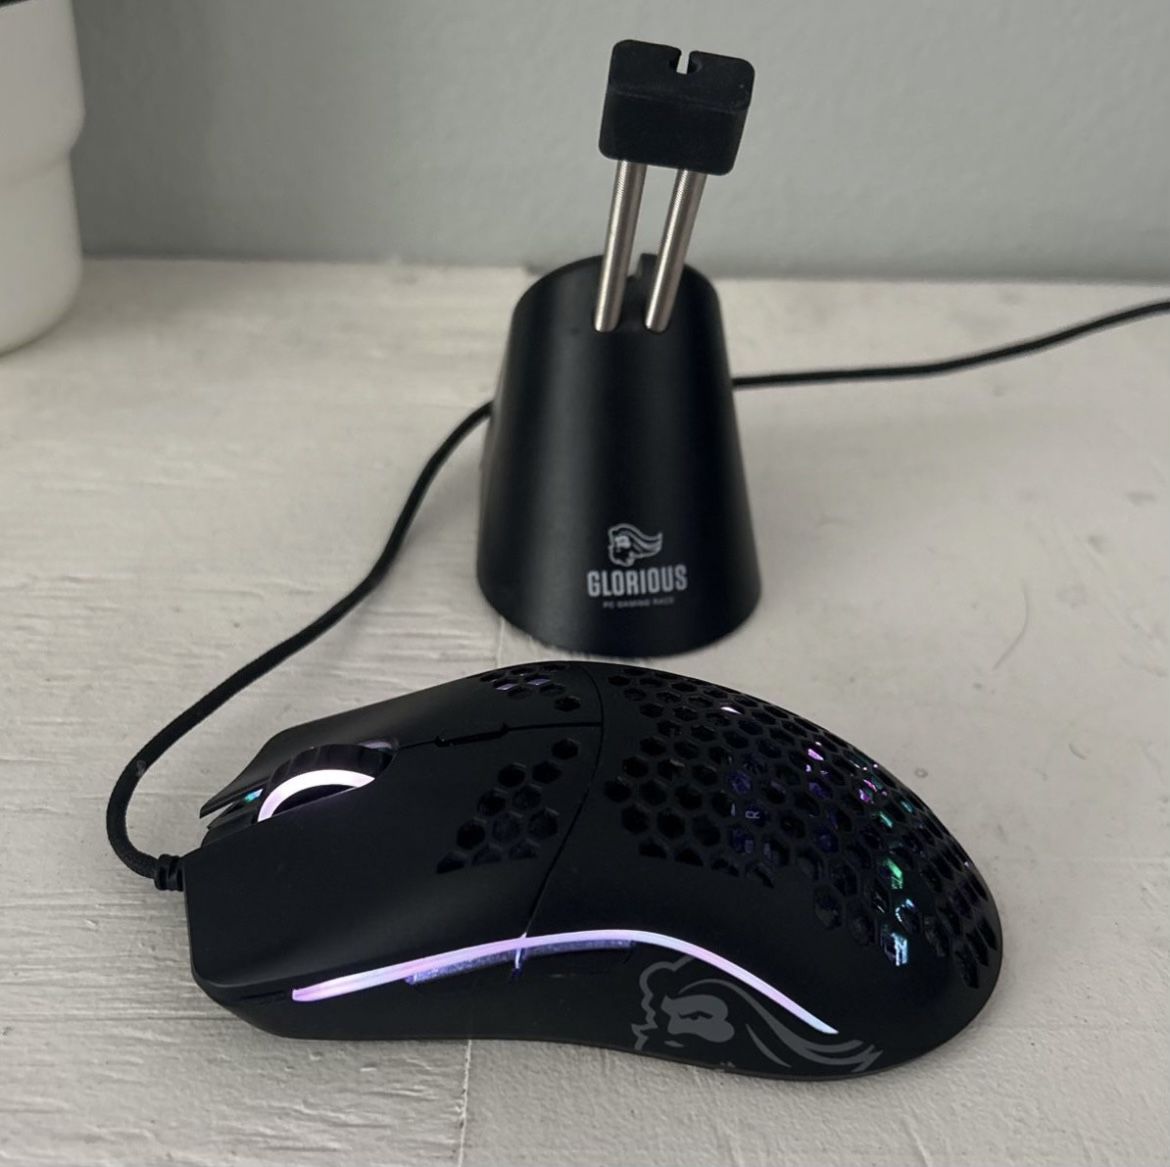 Glorious Model O gaming mouse & Glorious Mouse bungee